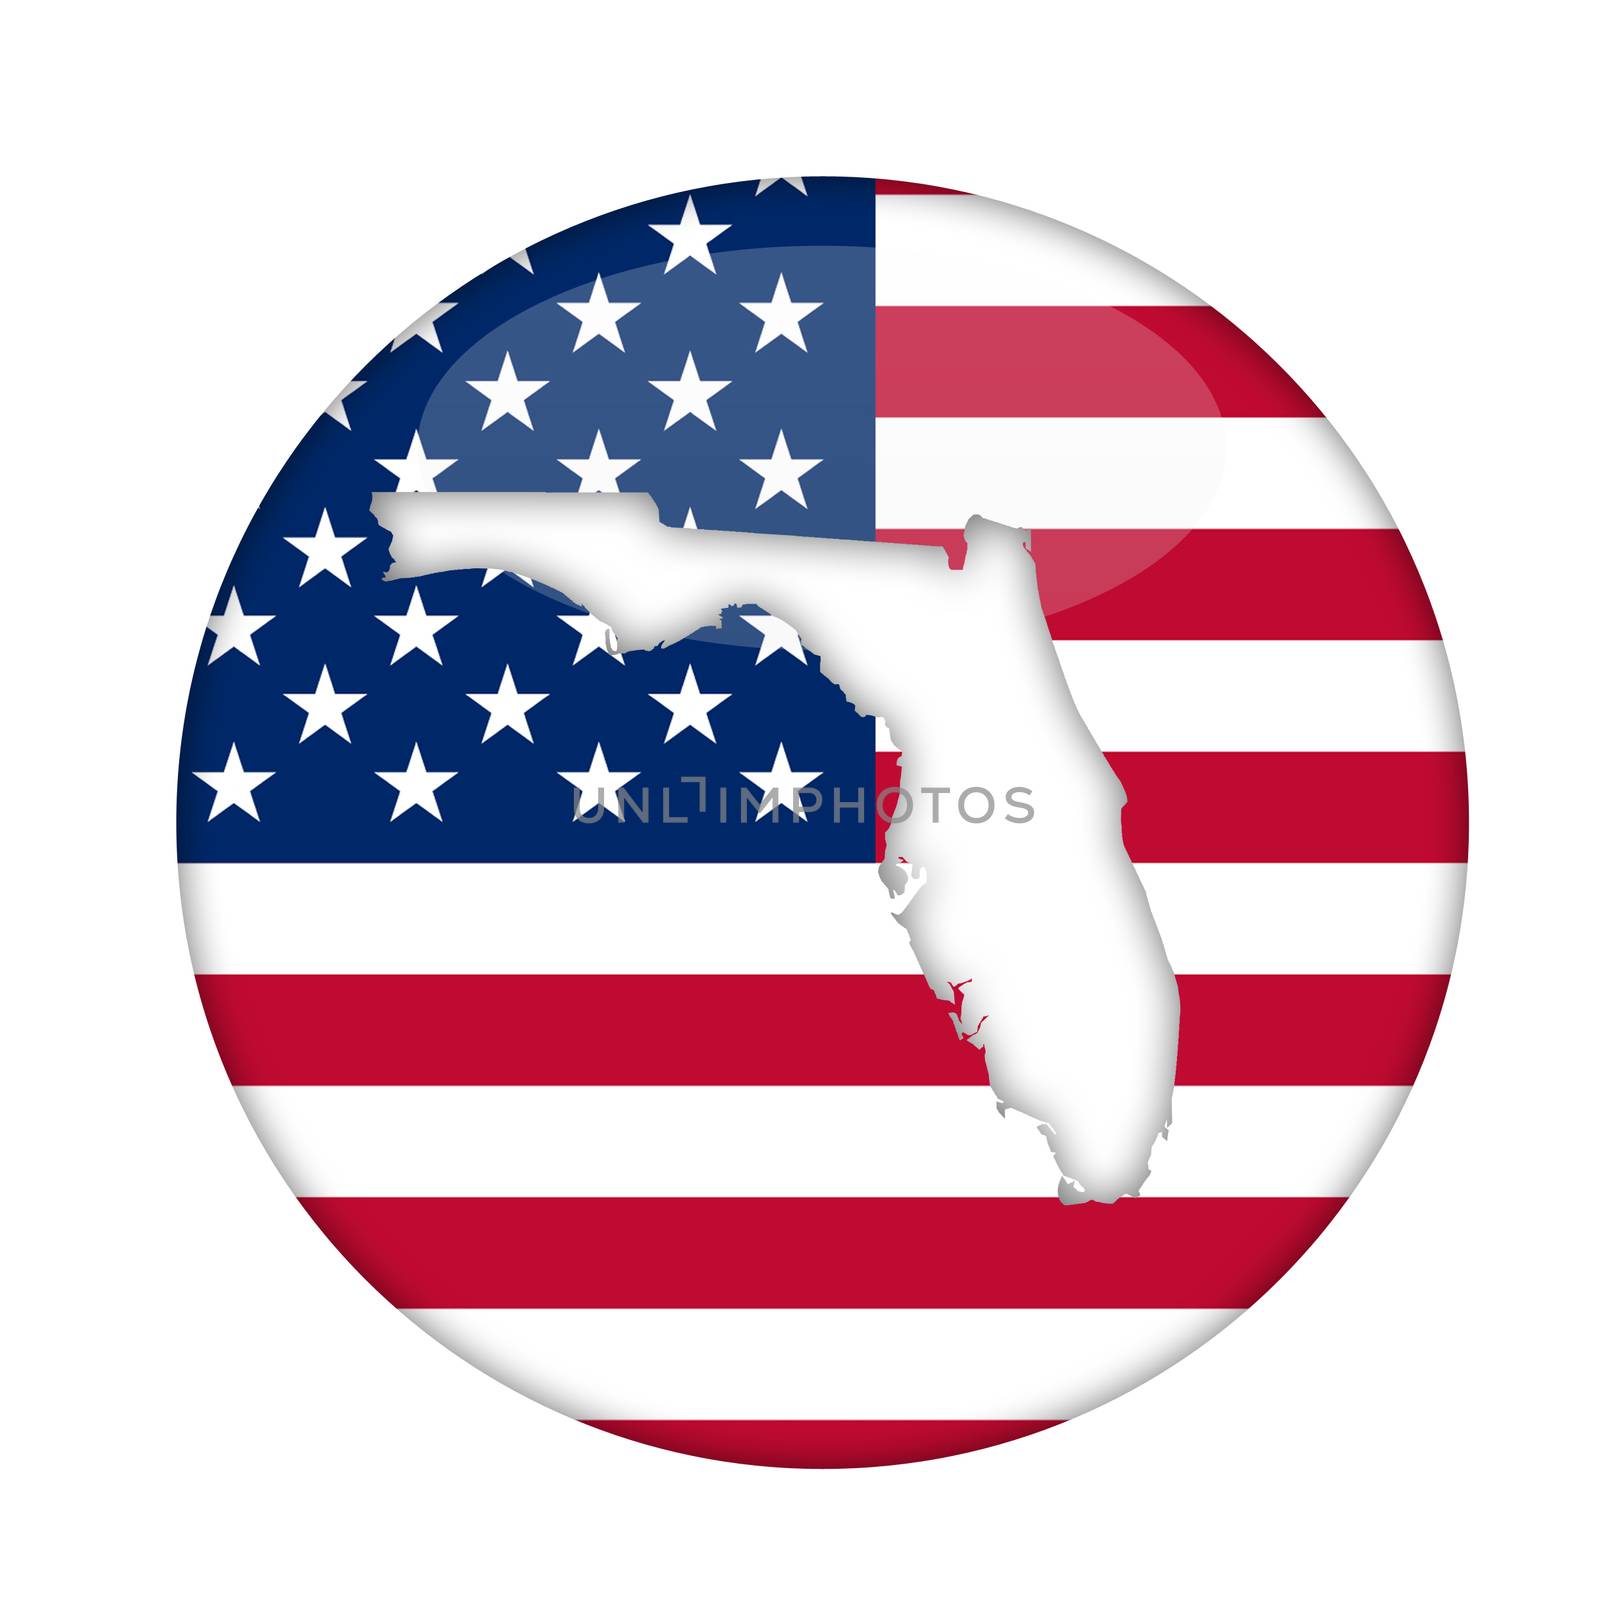 Florida state of America badge by speedfighter